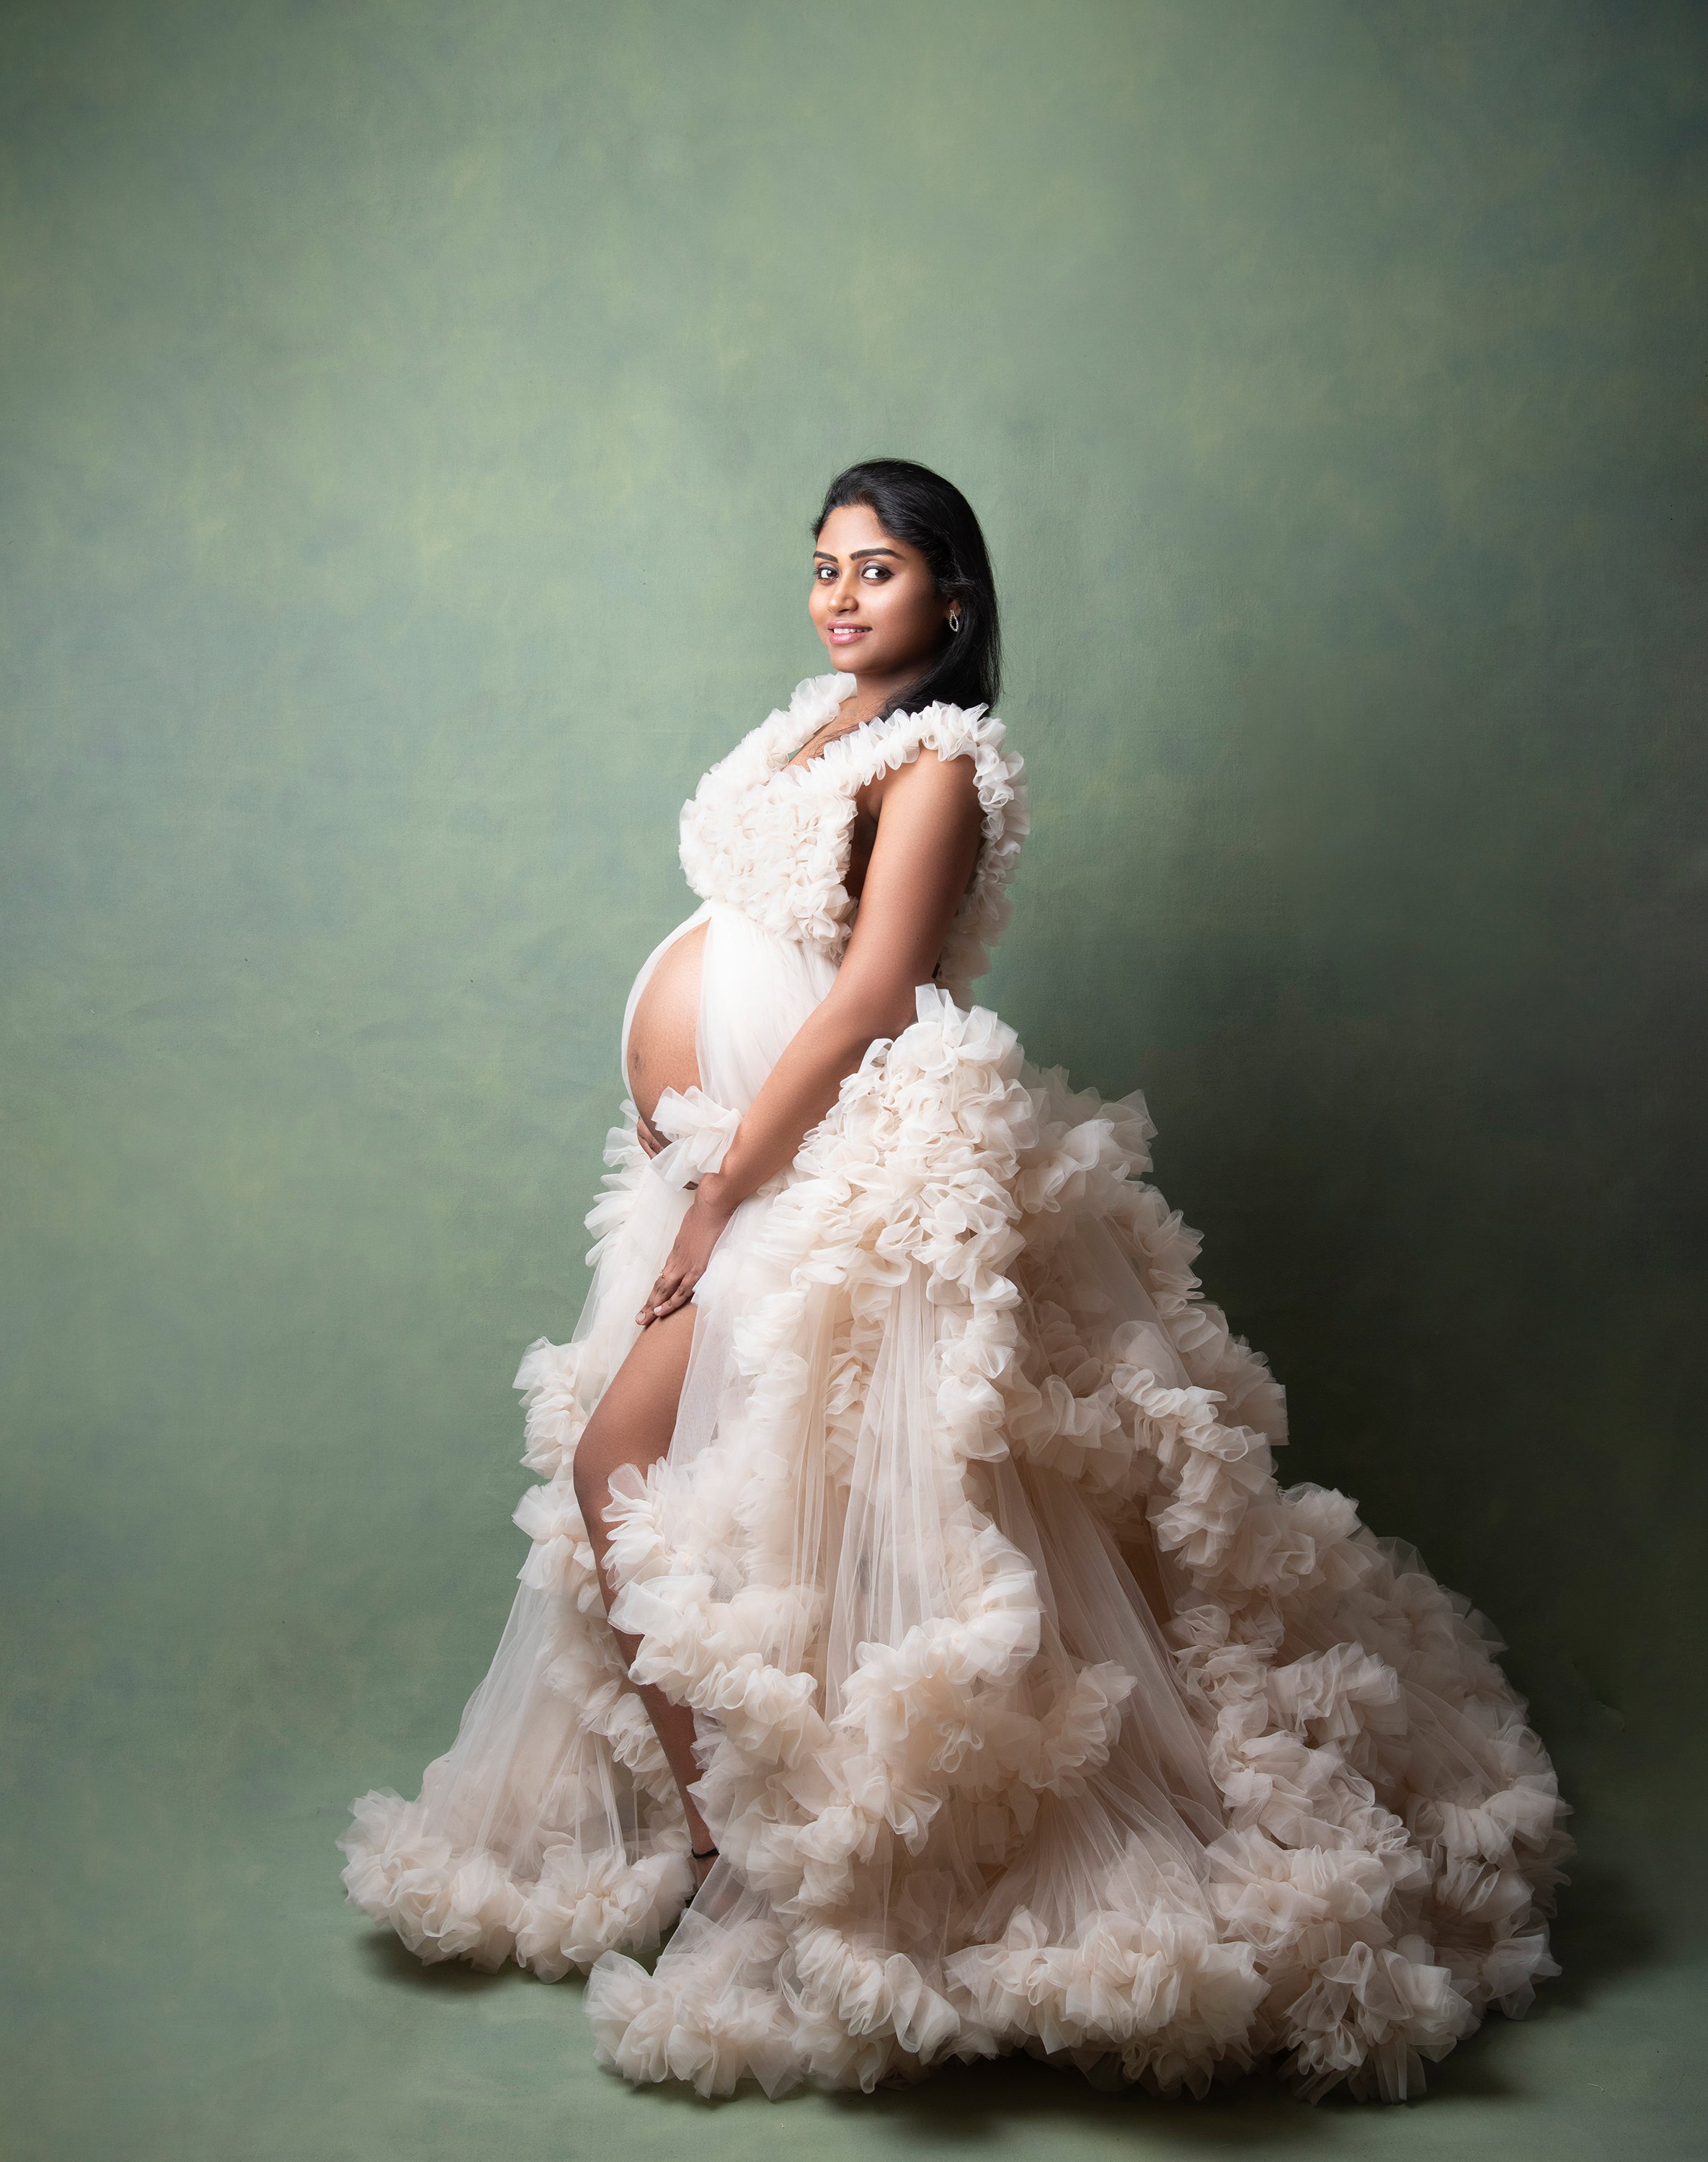 What To Wear For Maternity Photos - Becca Jean Photography